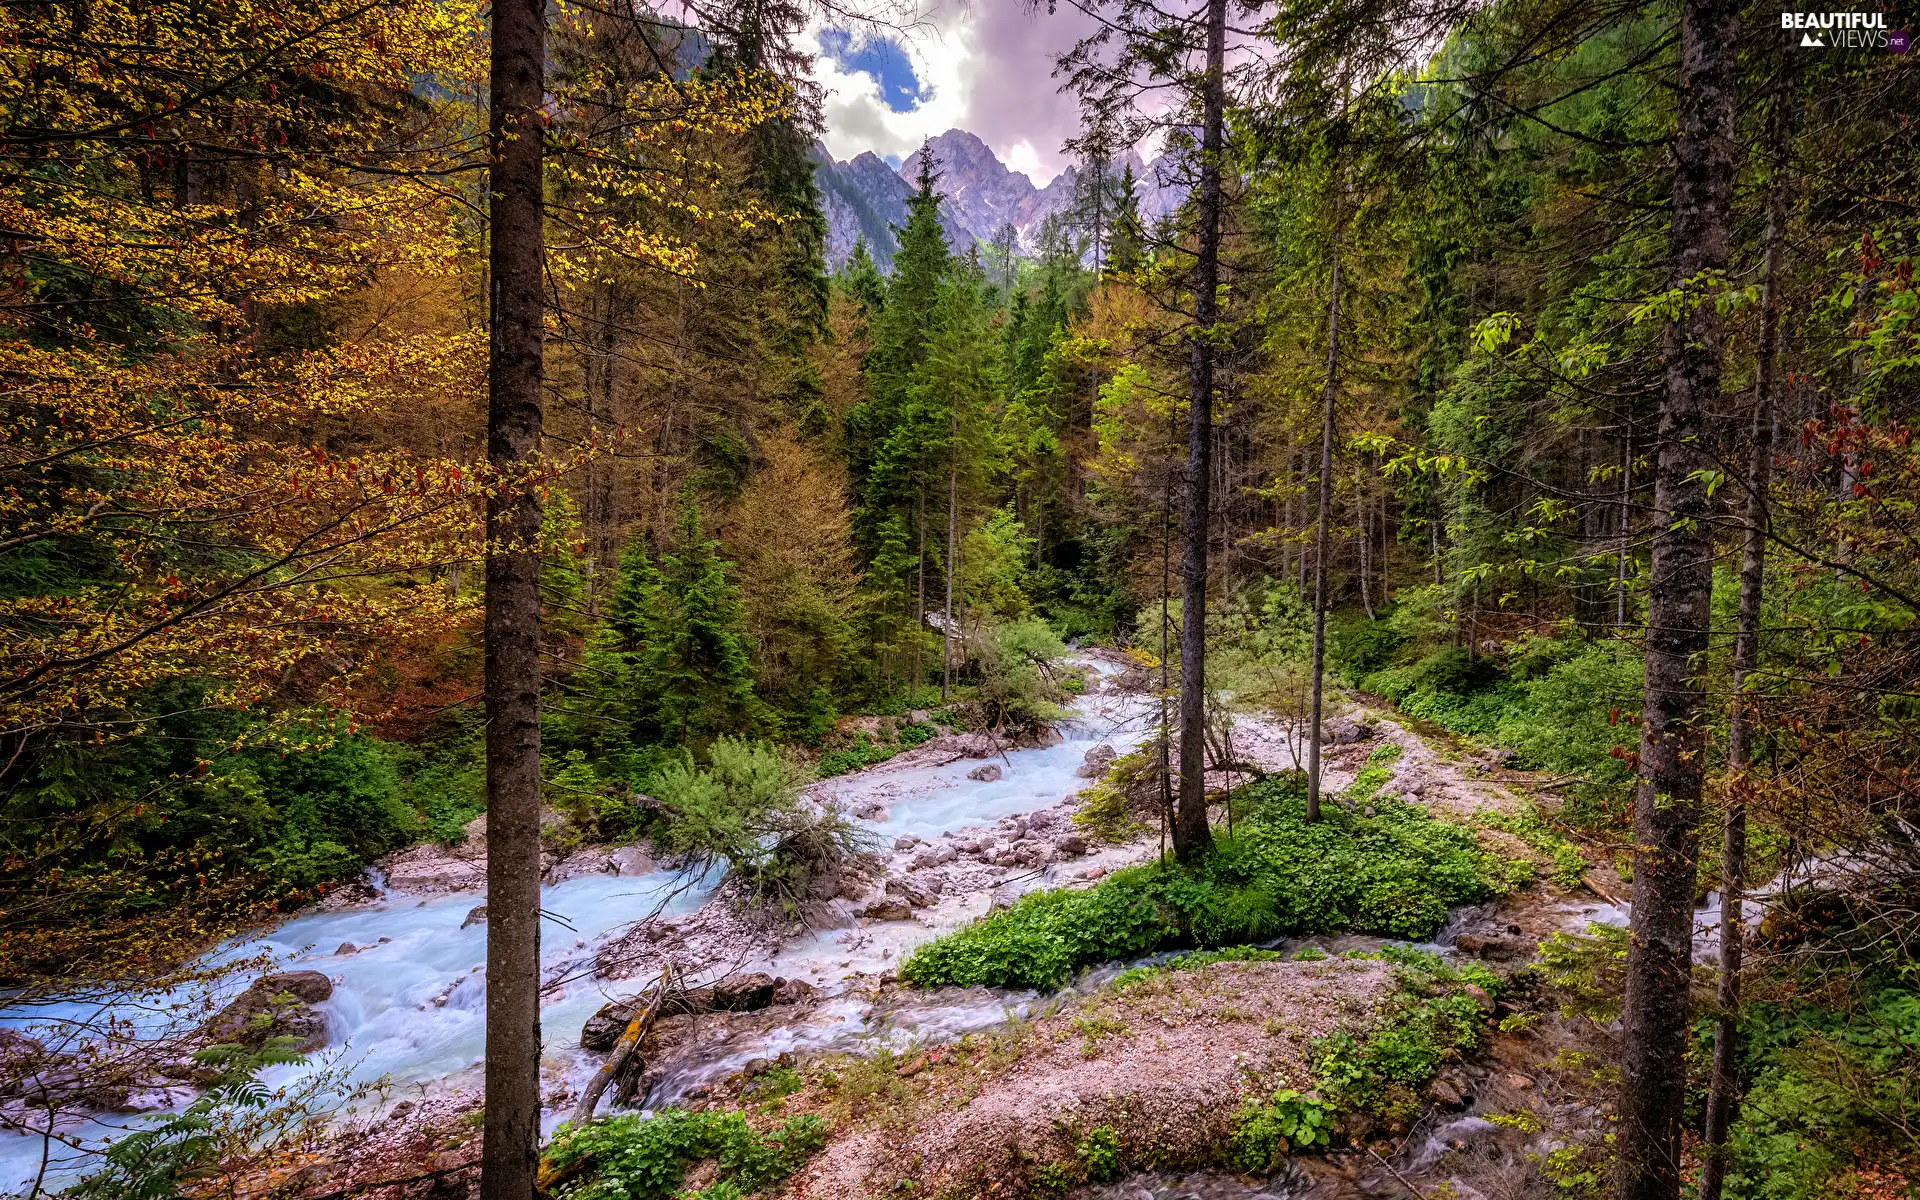 viewes, River, clouds, stream, Mountains, trees, forest, Stones